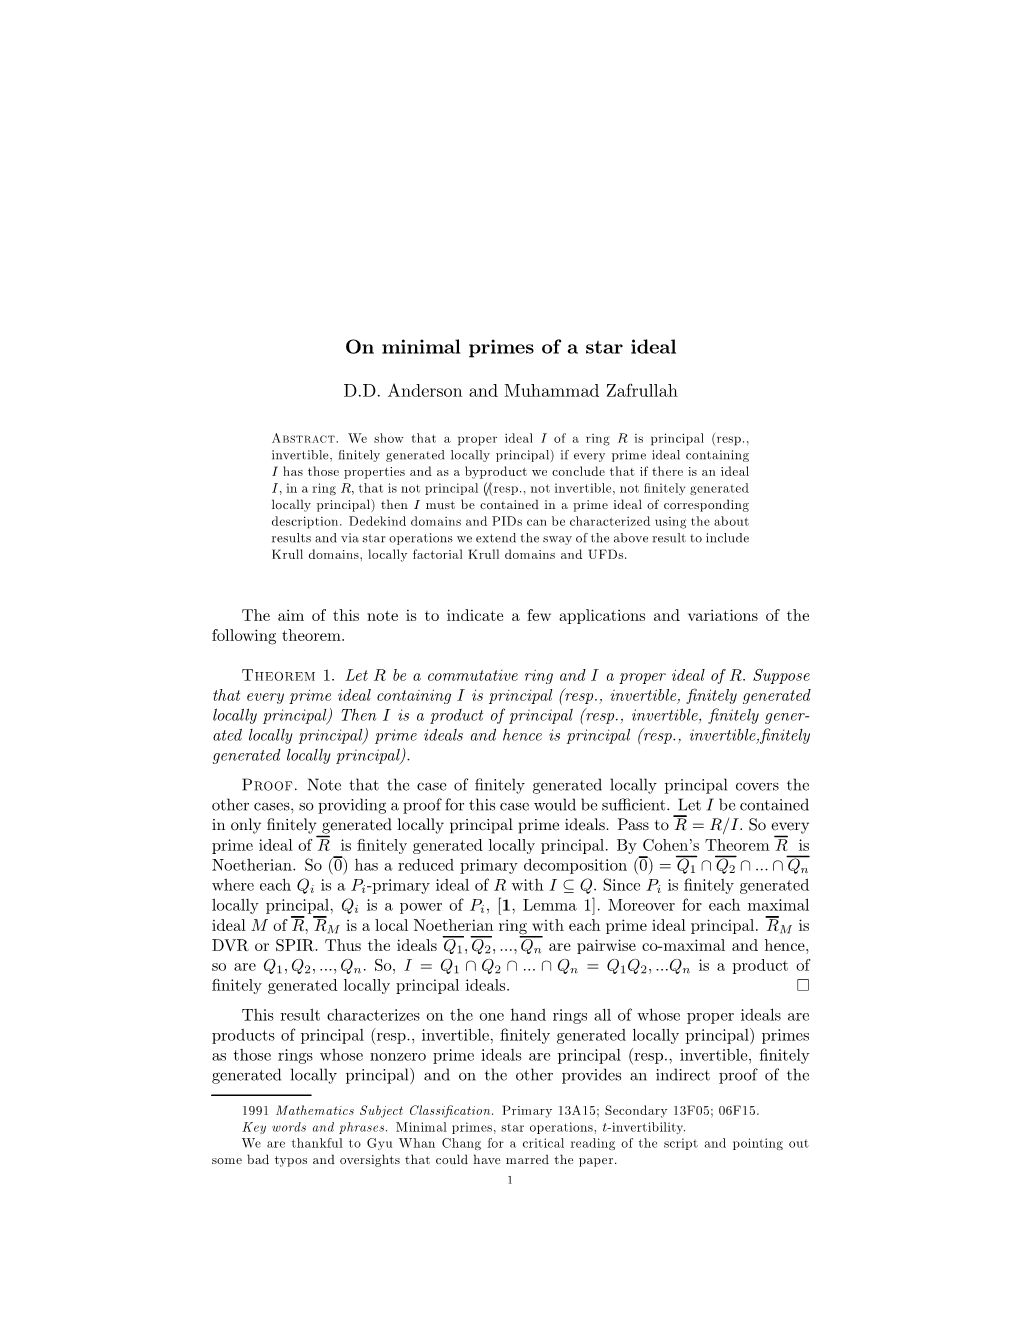 On Minimal Primes of a Star Ideal